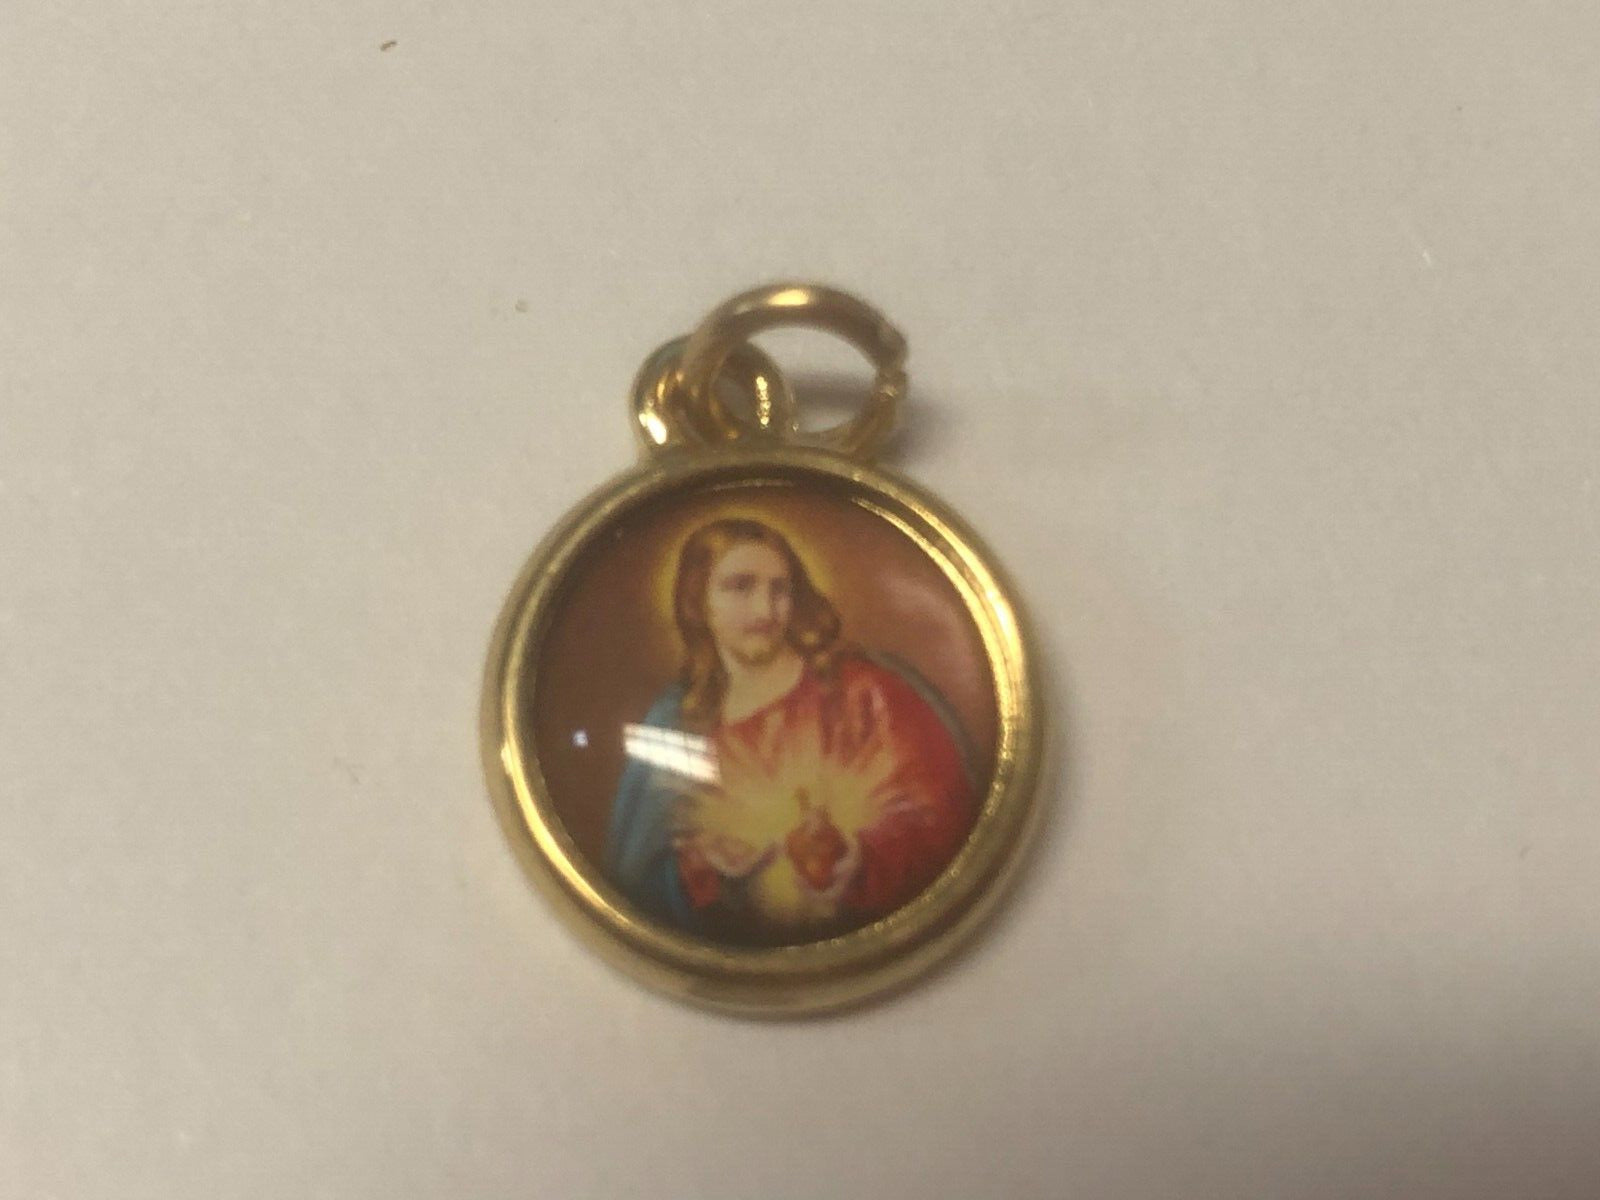 Saint Clare of Montefalco/Sacred Heart of Jesus, Small 2-sided Medal, New - Bob and Penny Lord